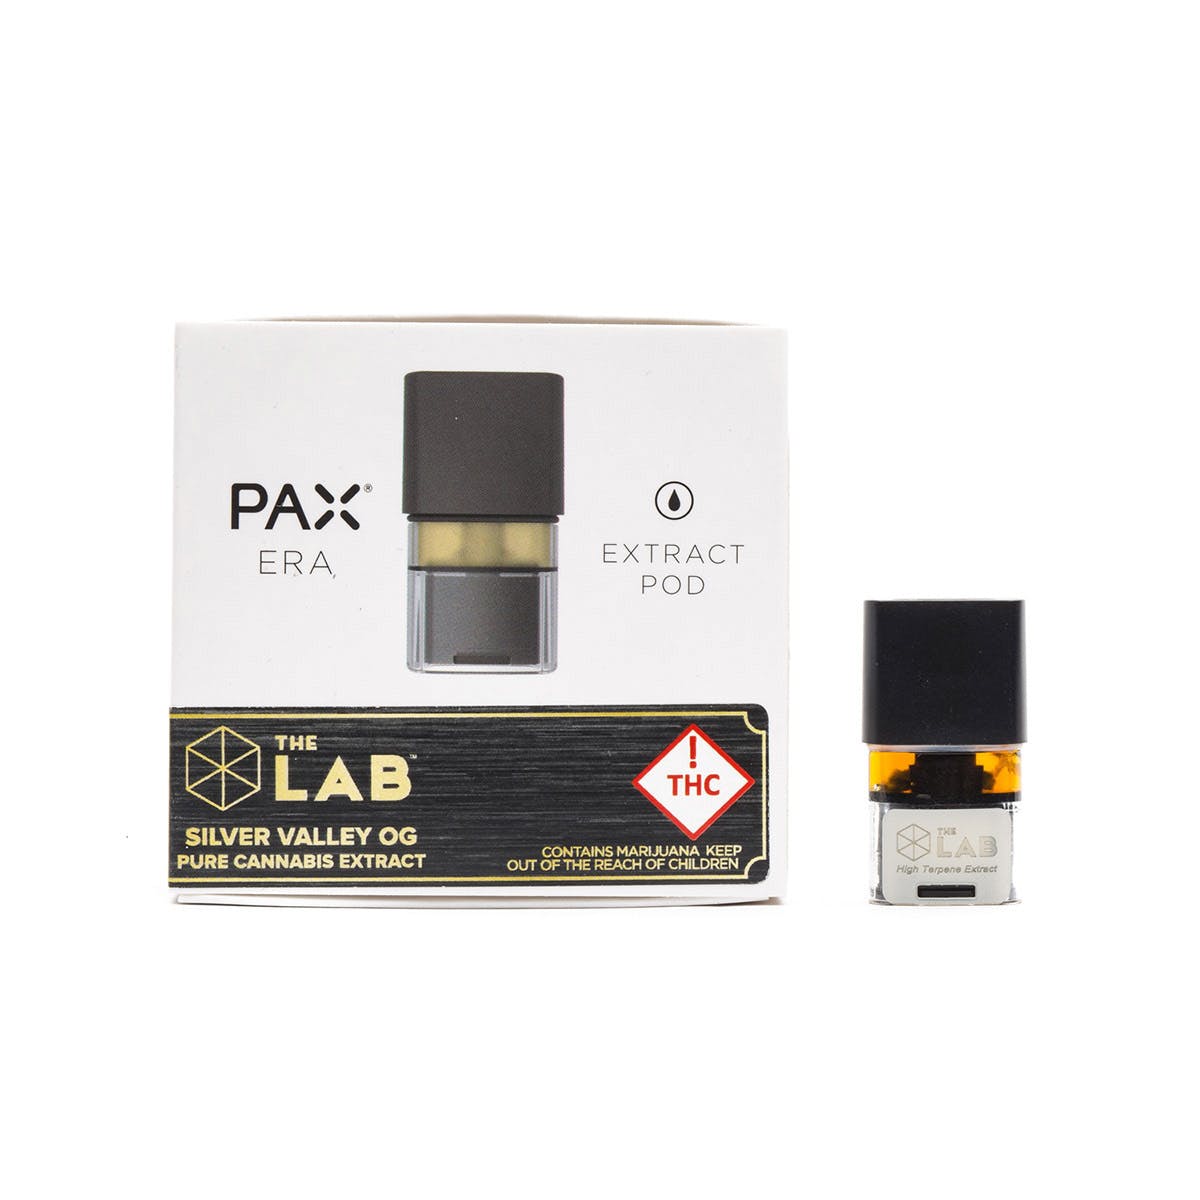 concentrate-the-lab-pax-era-pod-silver-valley-og-hte-500mg-rec